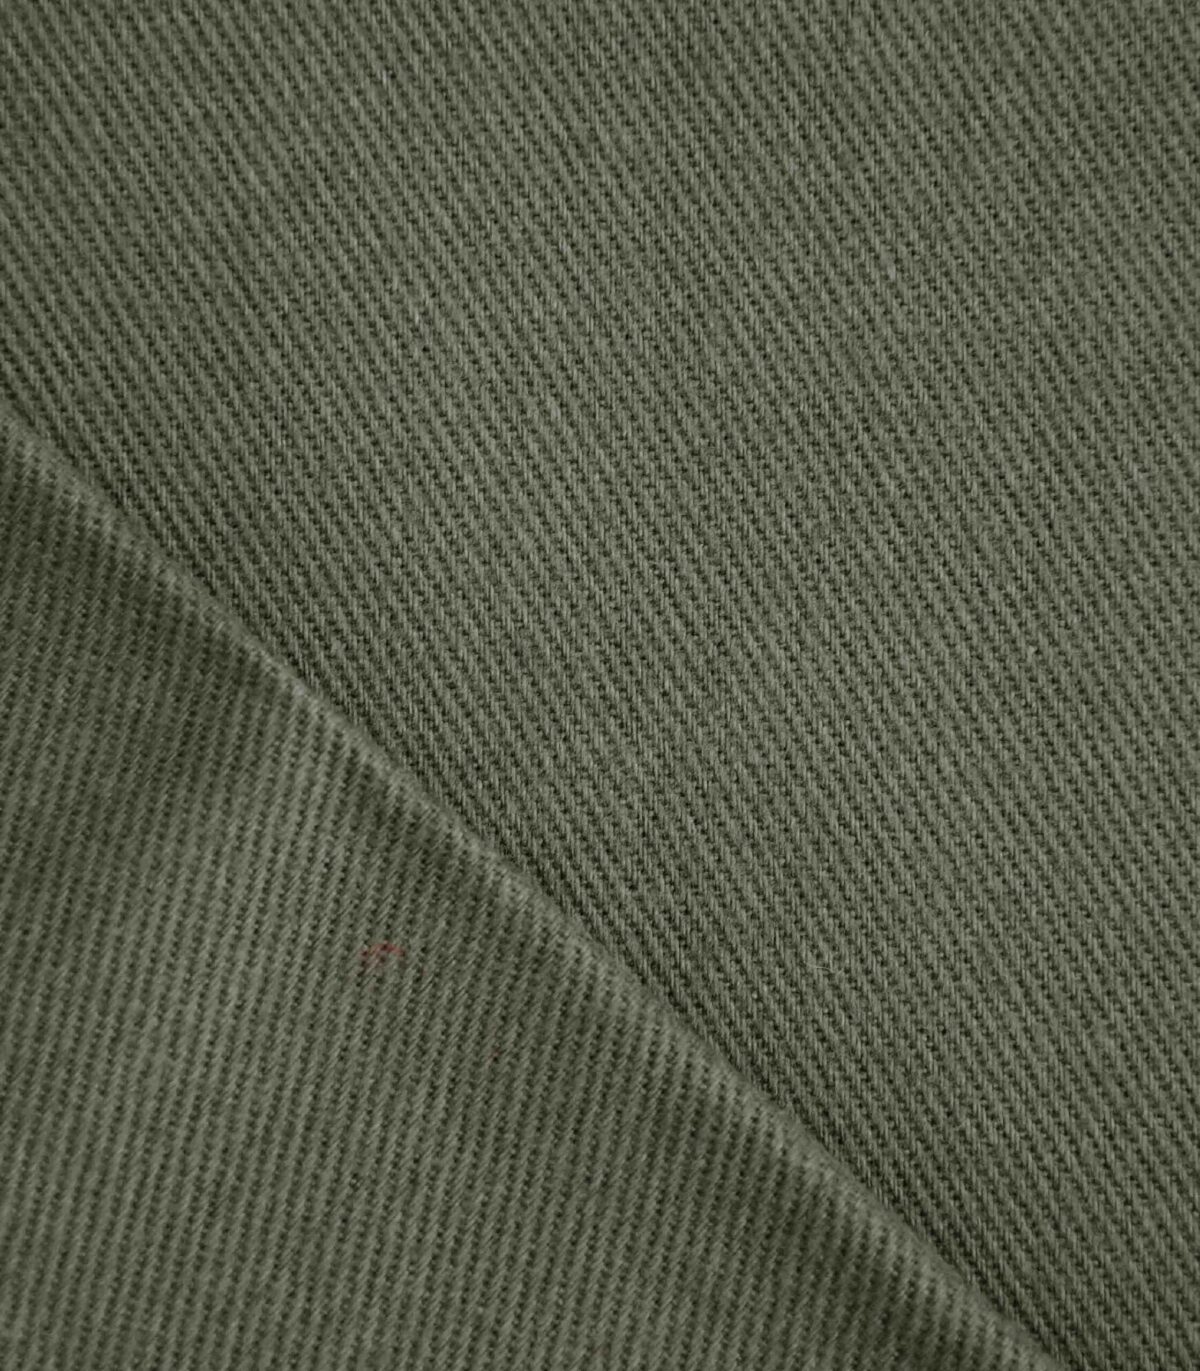 Dark Olive Color Cotton Brushed Fabric